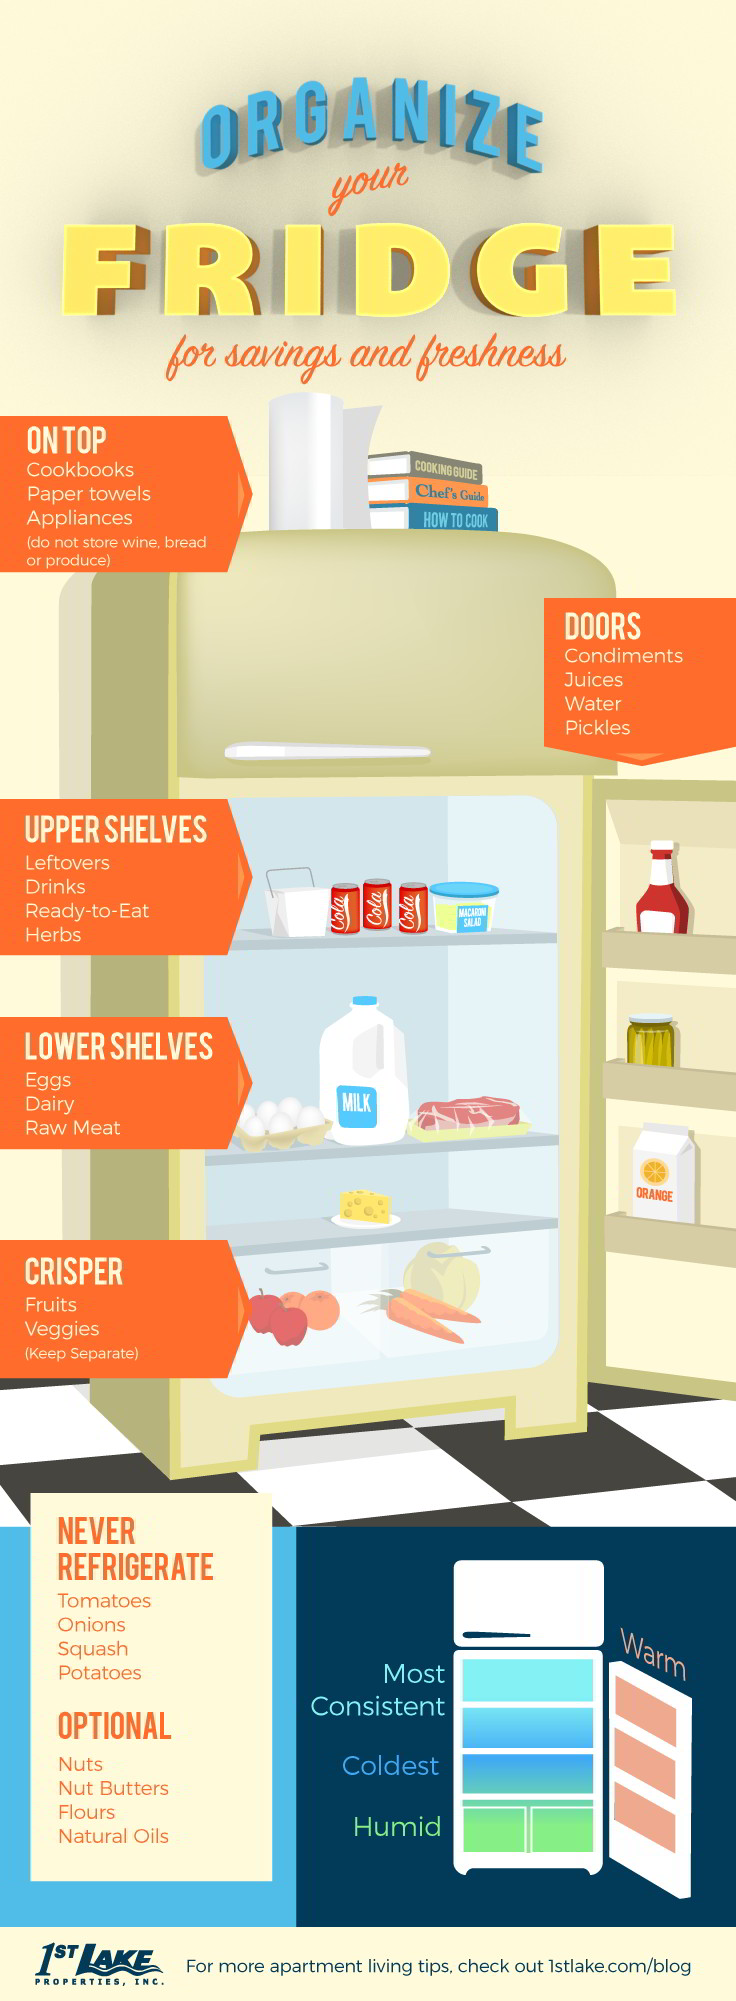 There are ways to create more space to make room for everything that needs to be refrigerated. Start with these fridge organization hacks, and read on for the best places to store everything inside your refrigerator.